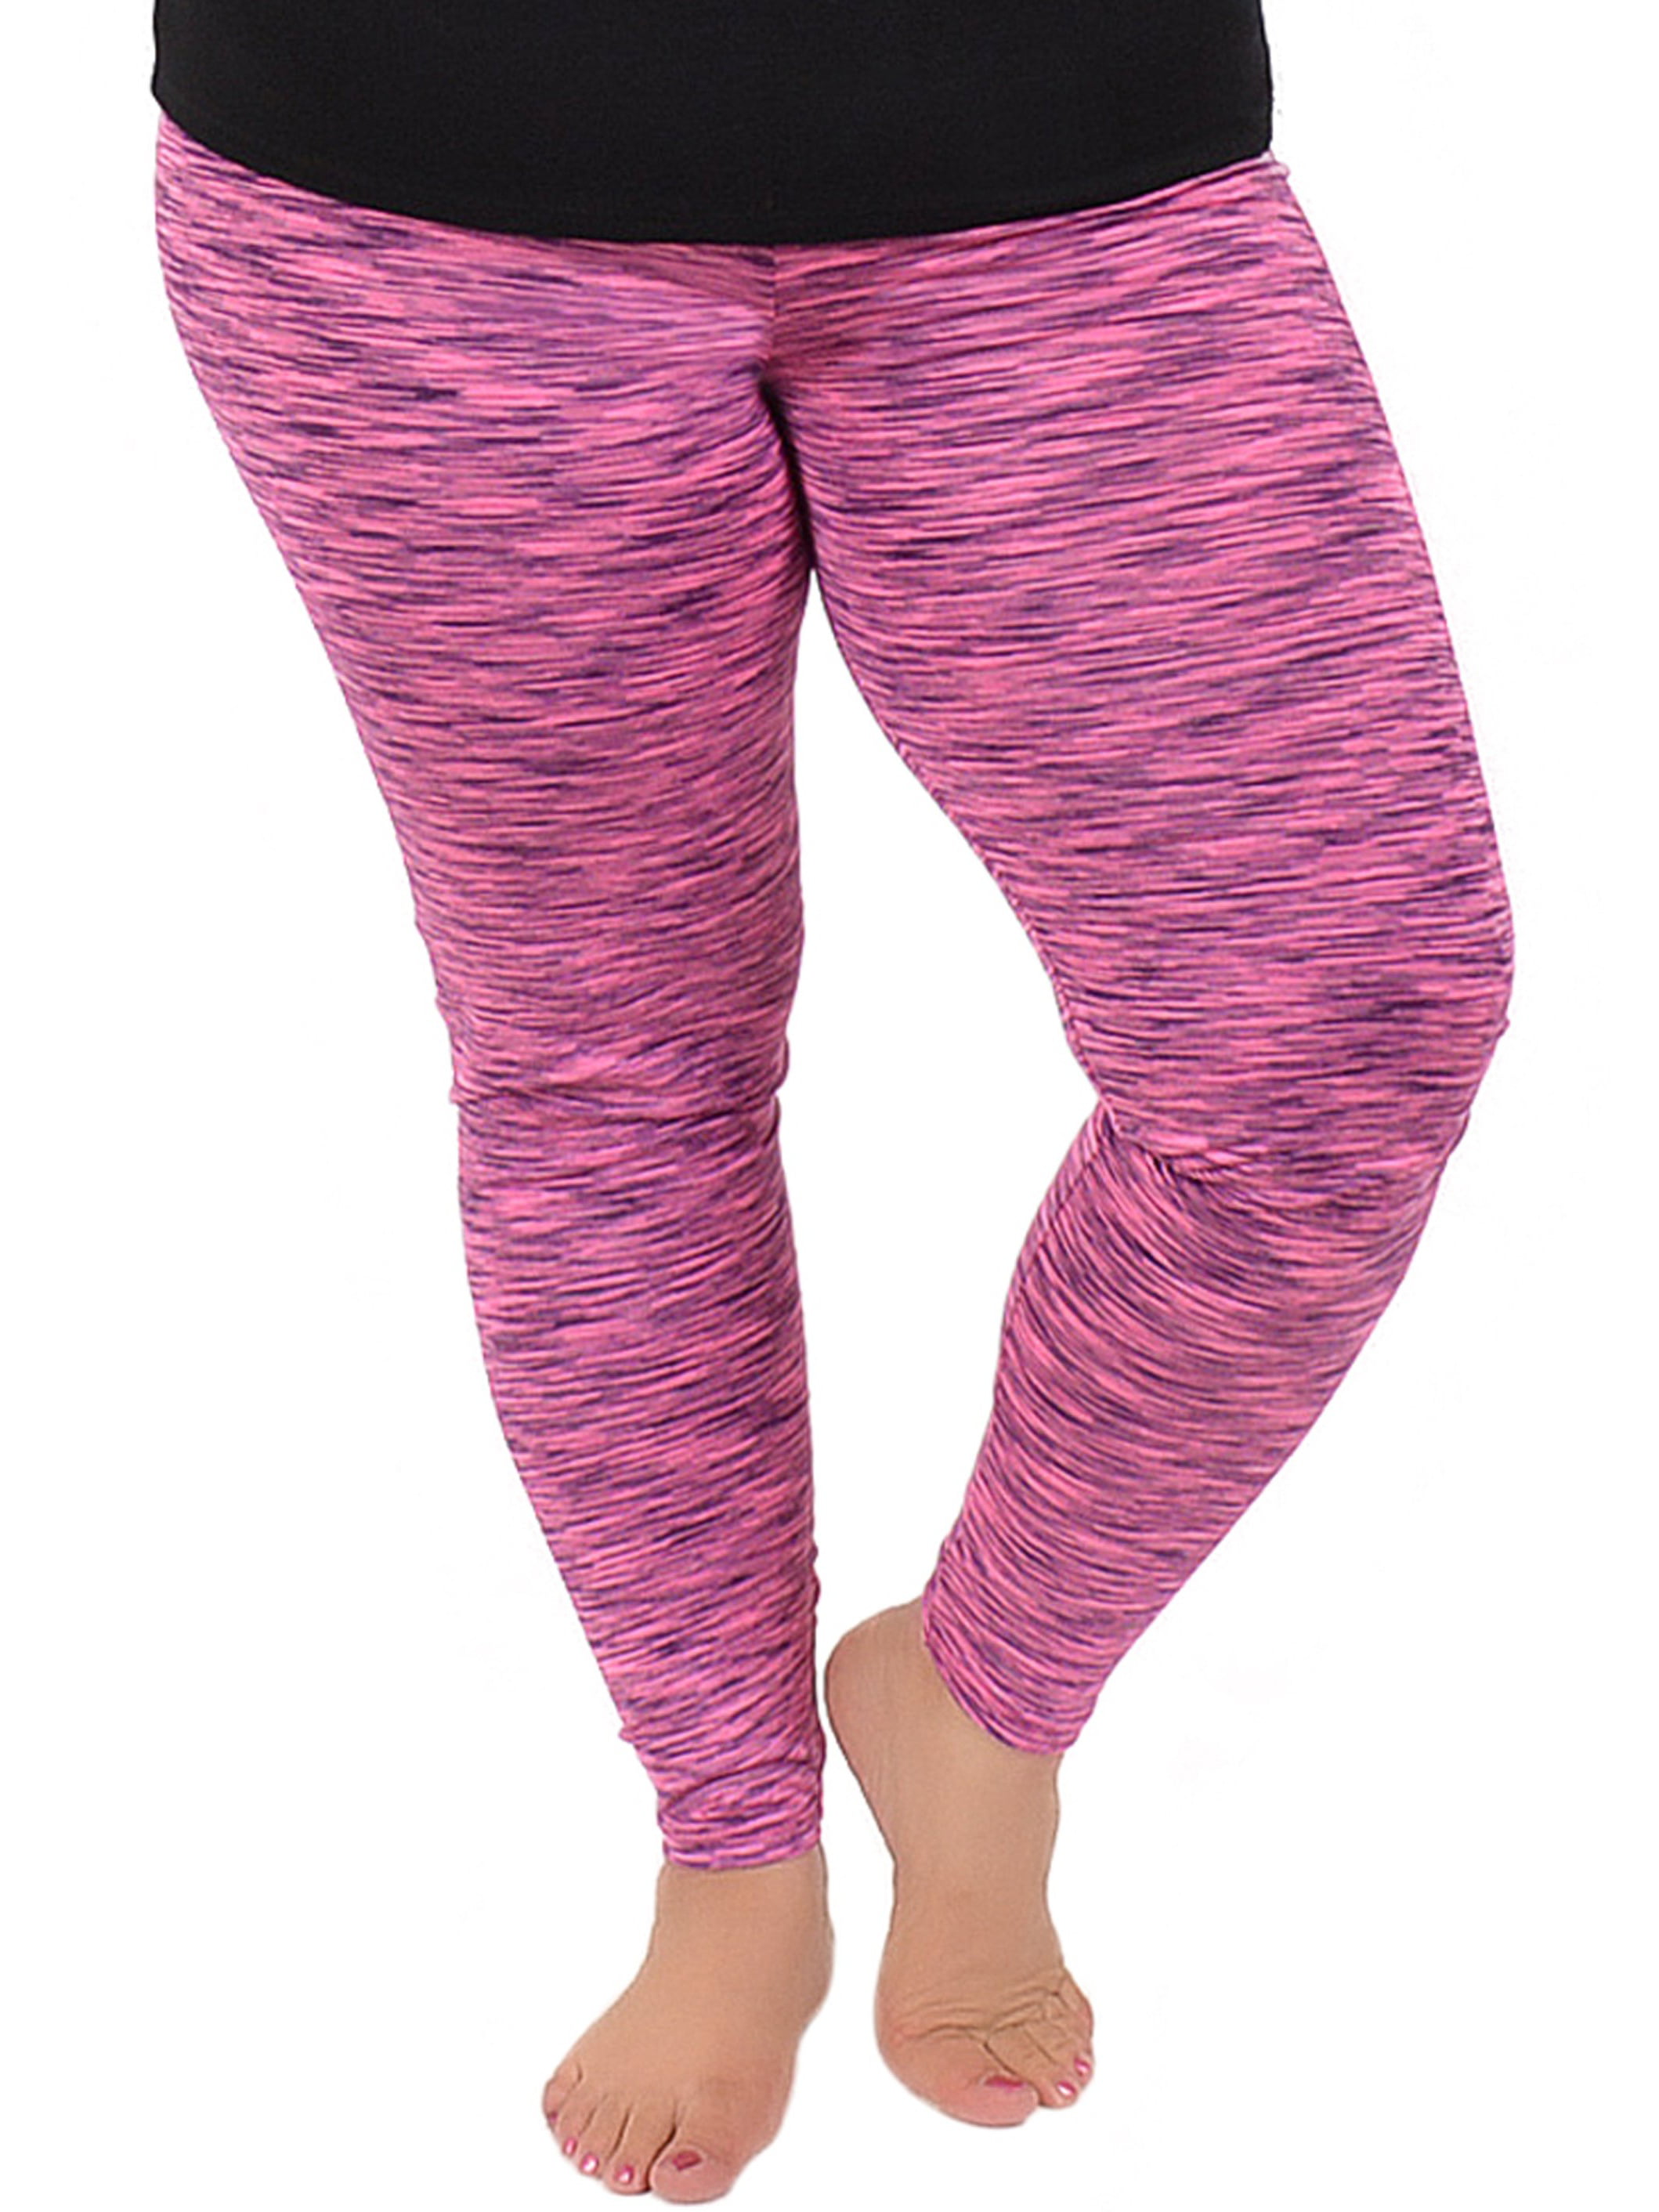 Just My Size Women's Plus-Size Stretch Jersey Full Length Leggings